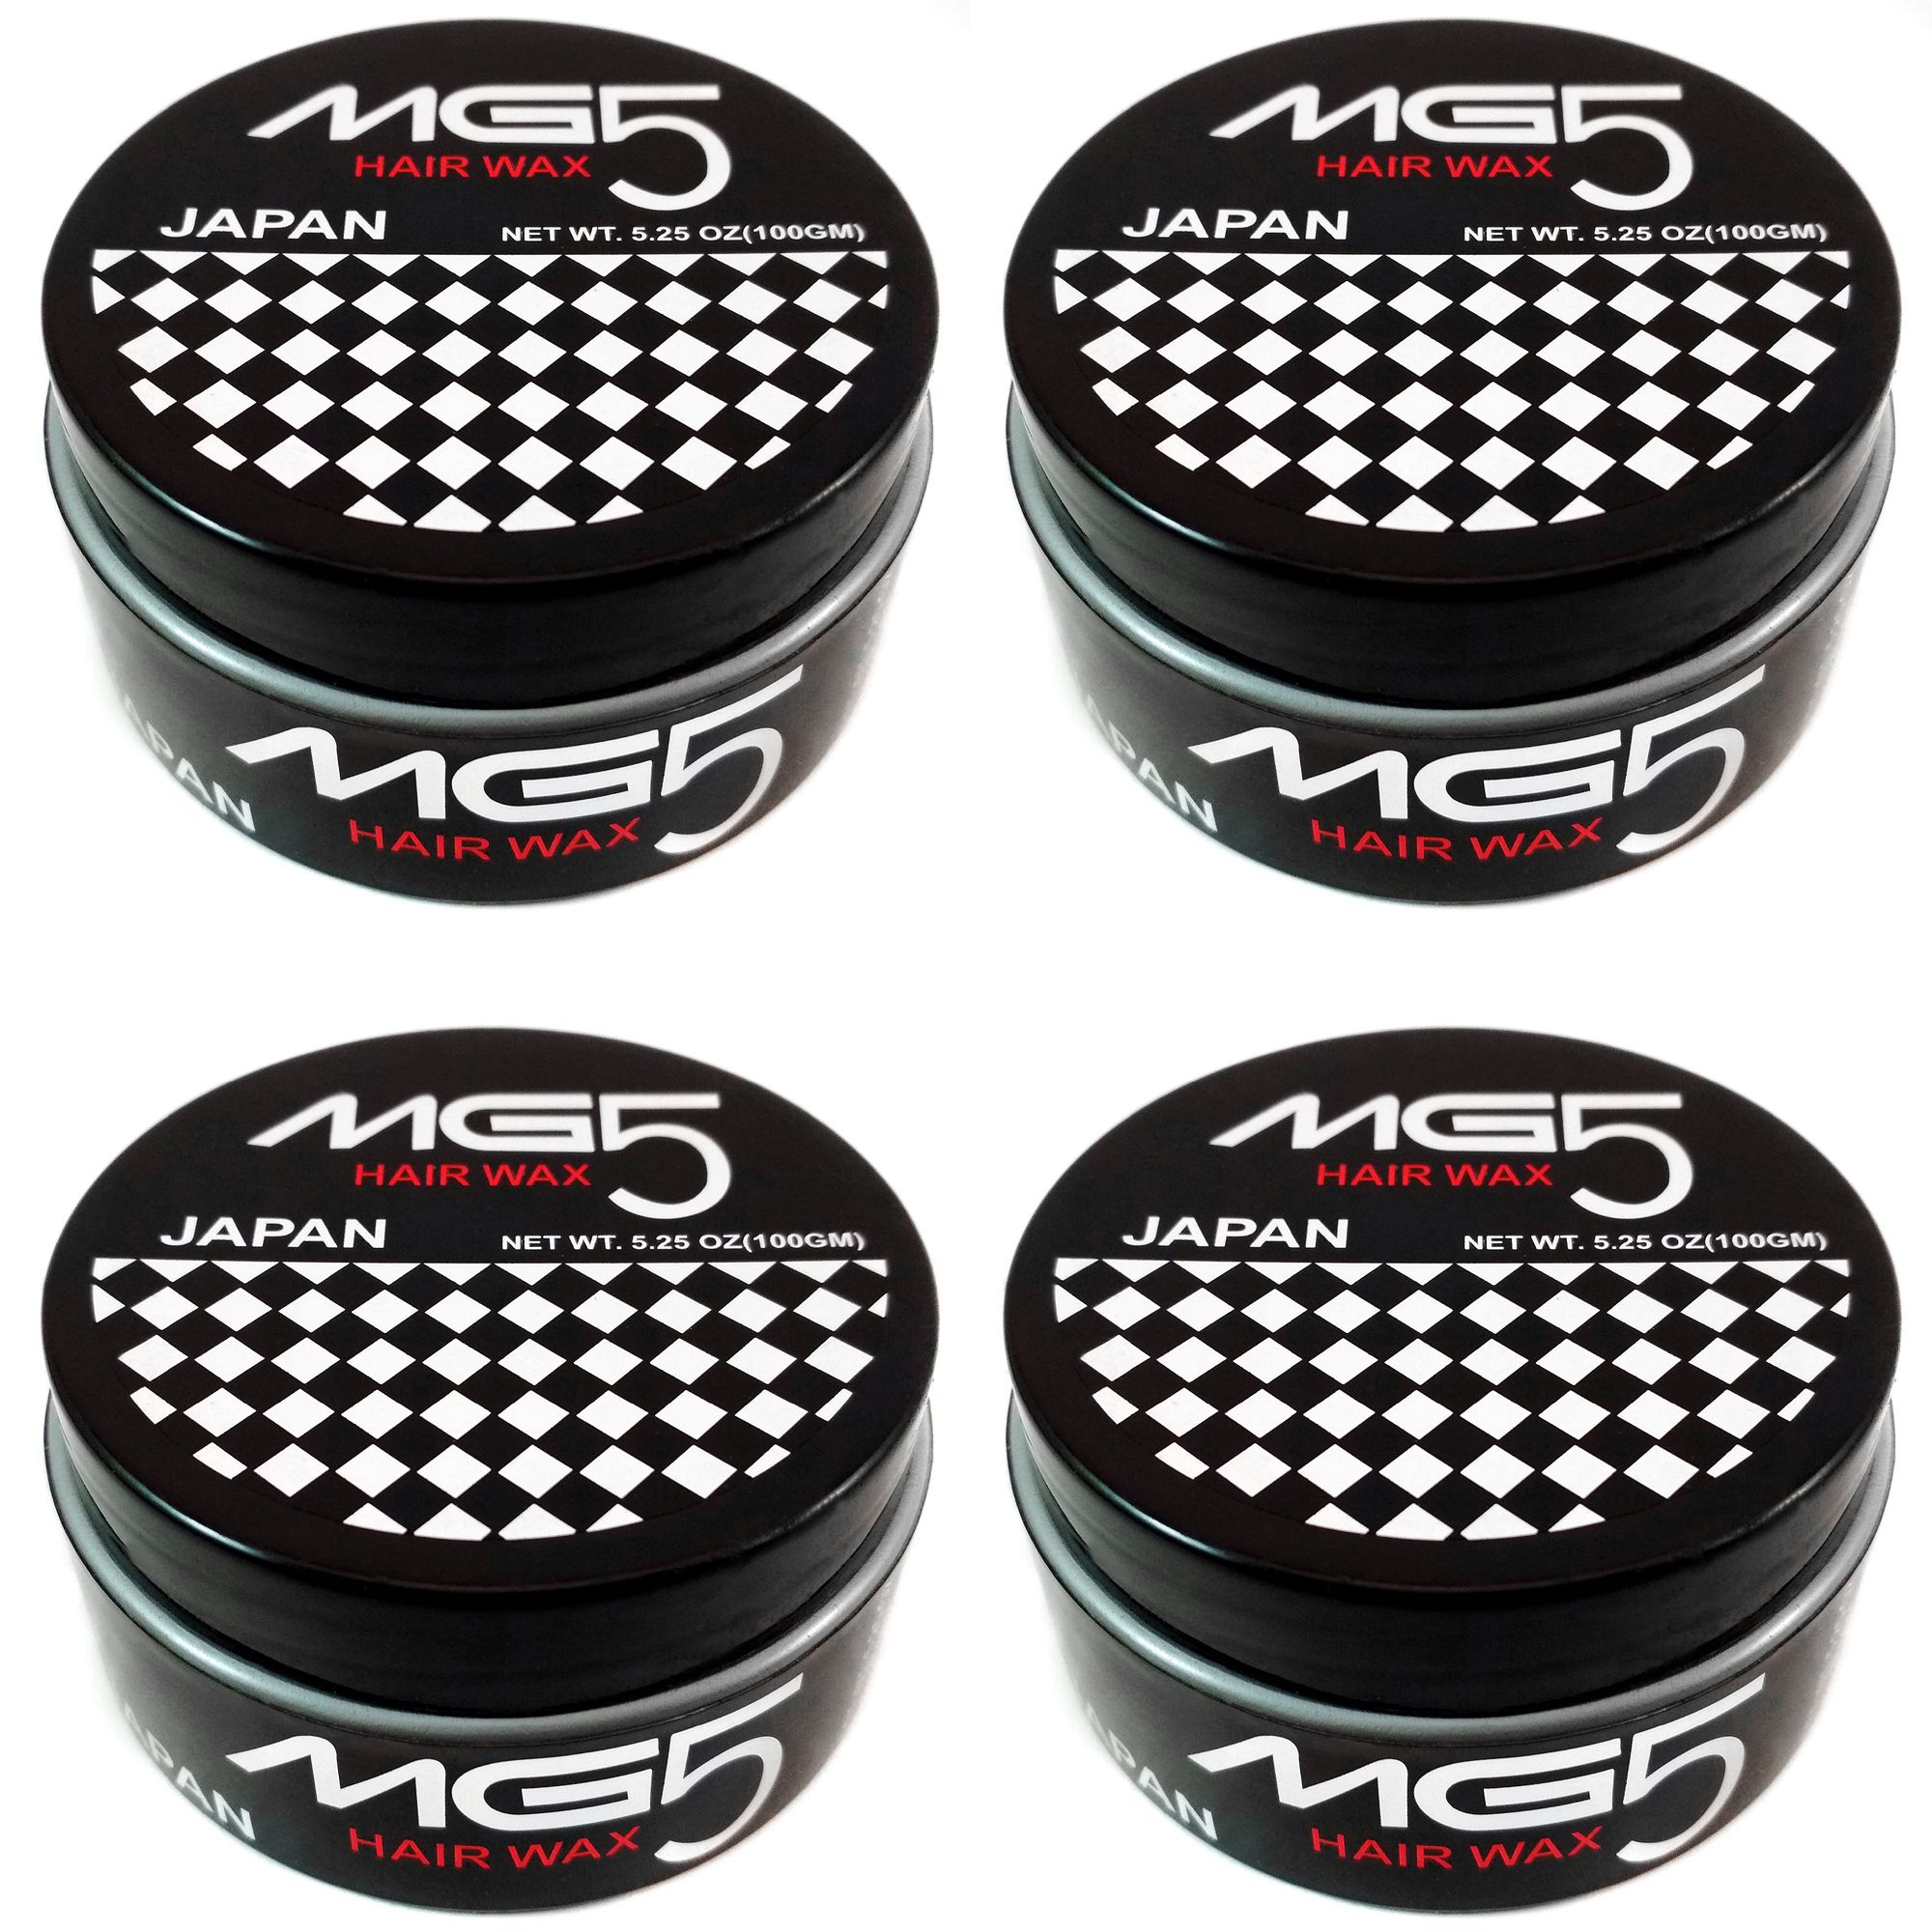 mg5 hair wax Super Hold Wax 400 gm Pack of 4: Buy mg5 hair wax Super Hold  Wax 400 gm Pack of 4 at Best Prices in India - Snapdeal